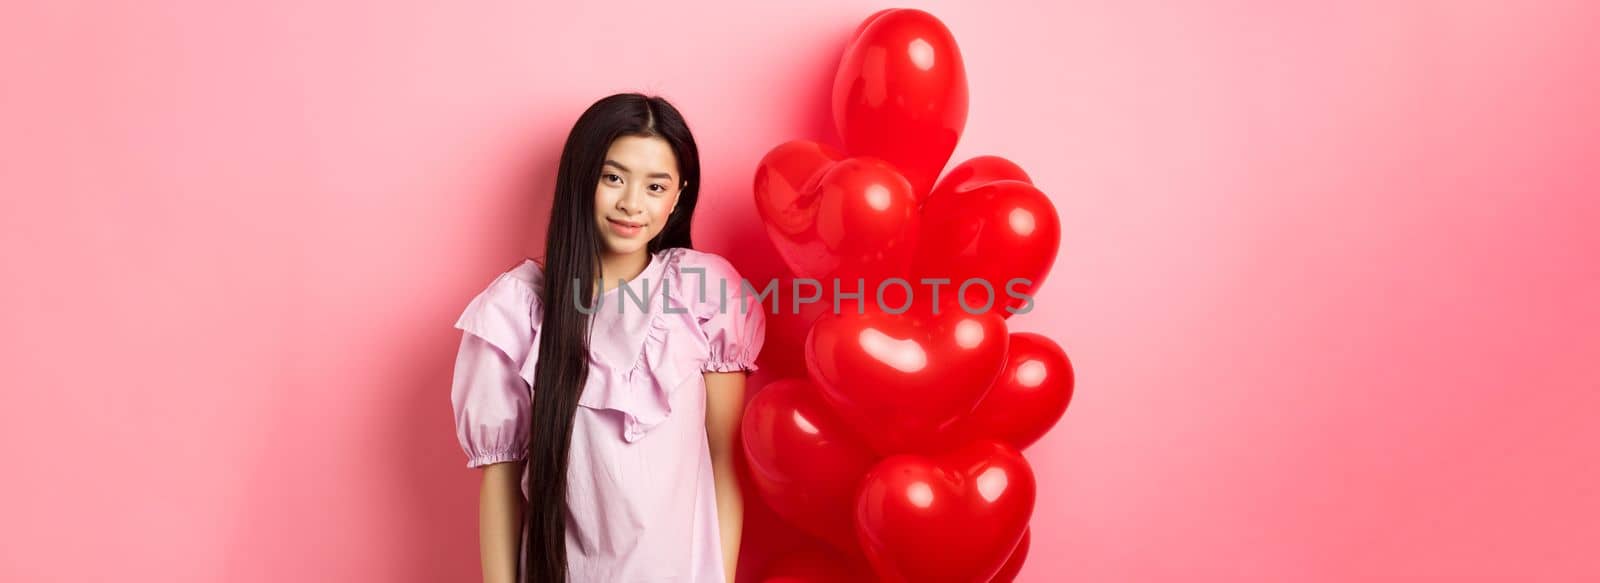 Cute and tender girl looking with love, celebrating valentines and white day with lover, standing near romantic heart balloons on pink background. Relationship concept.